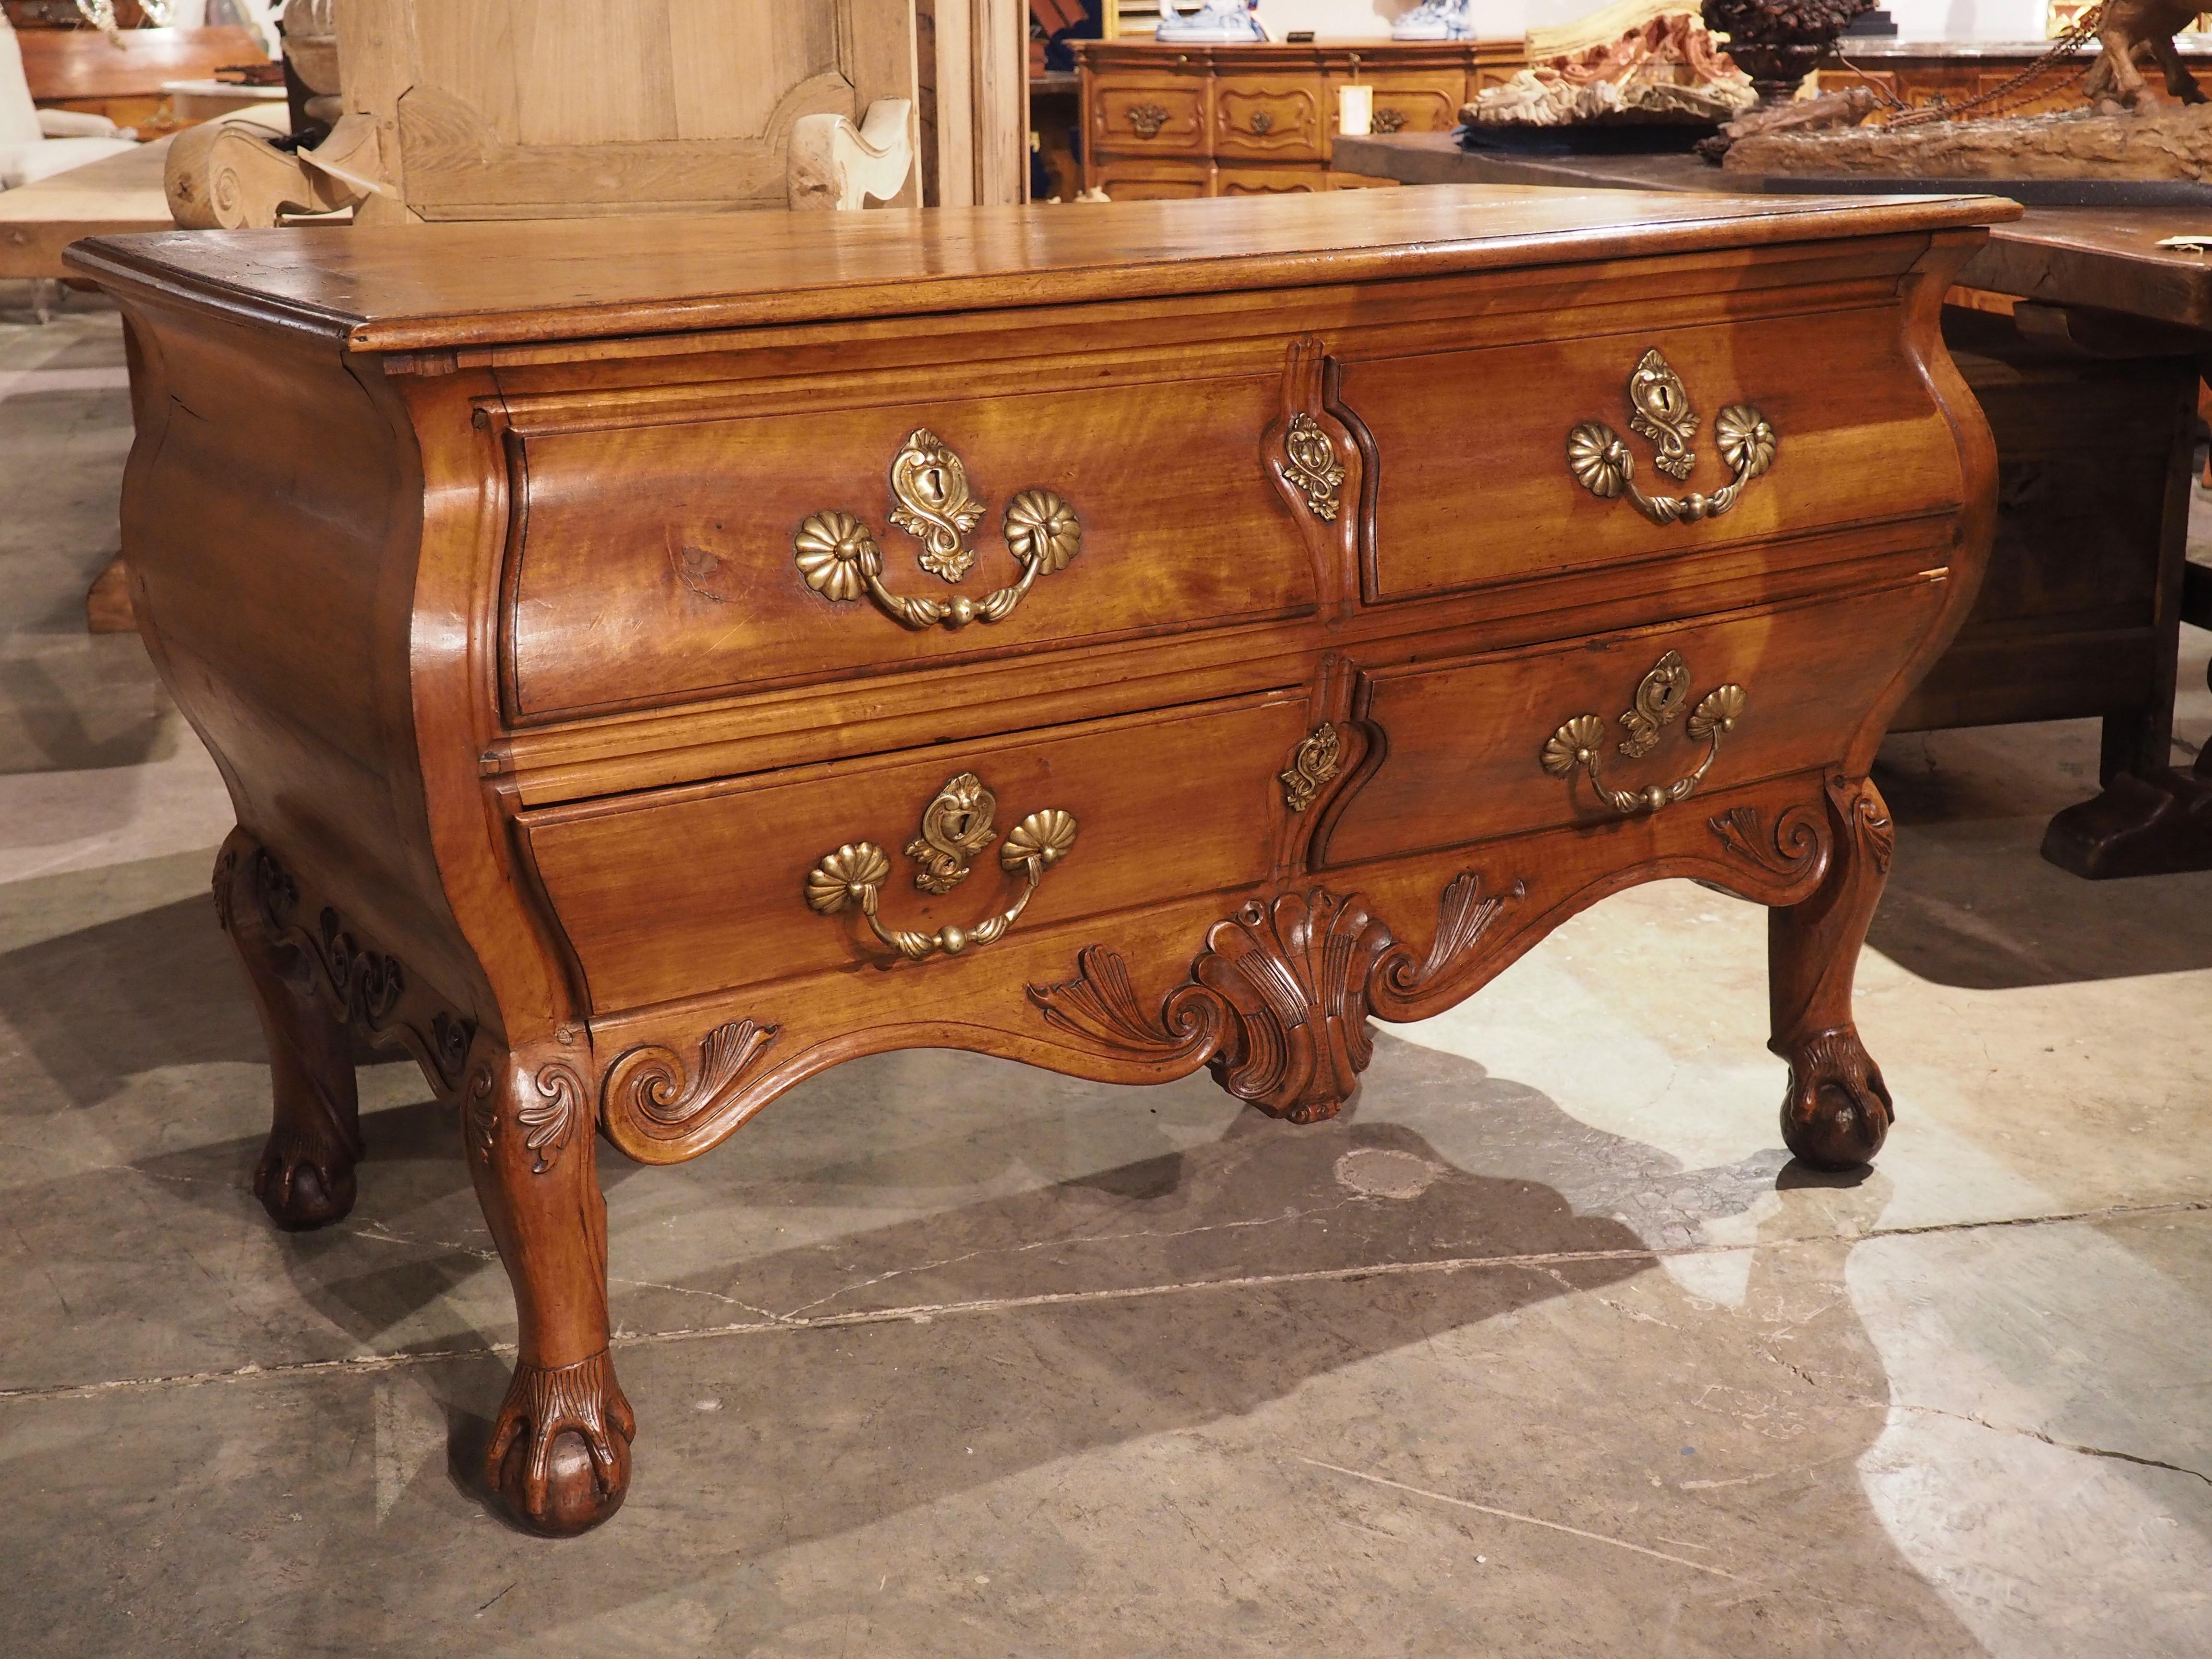 Rare 18th Century French Walnut Commode “Angouleme” with Stamped Bronze Hardware For Sale 5